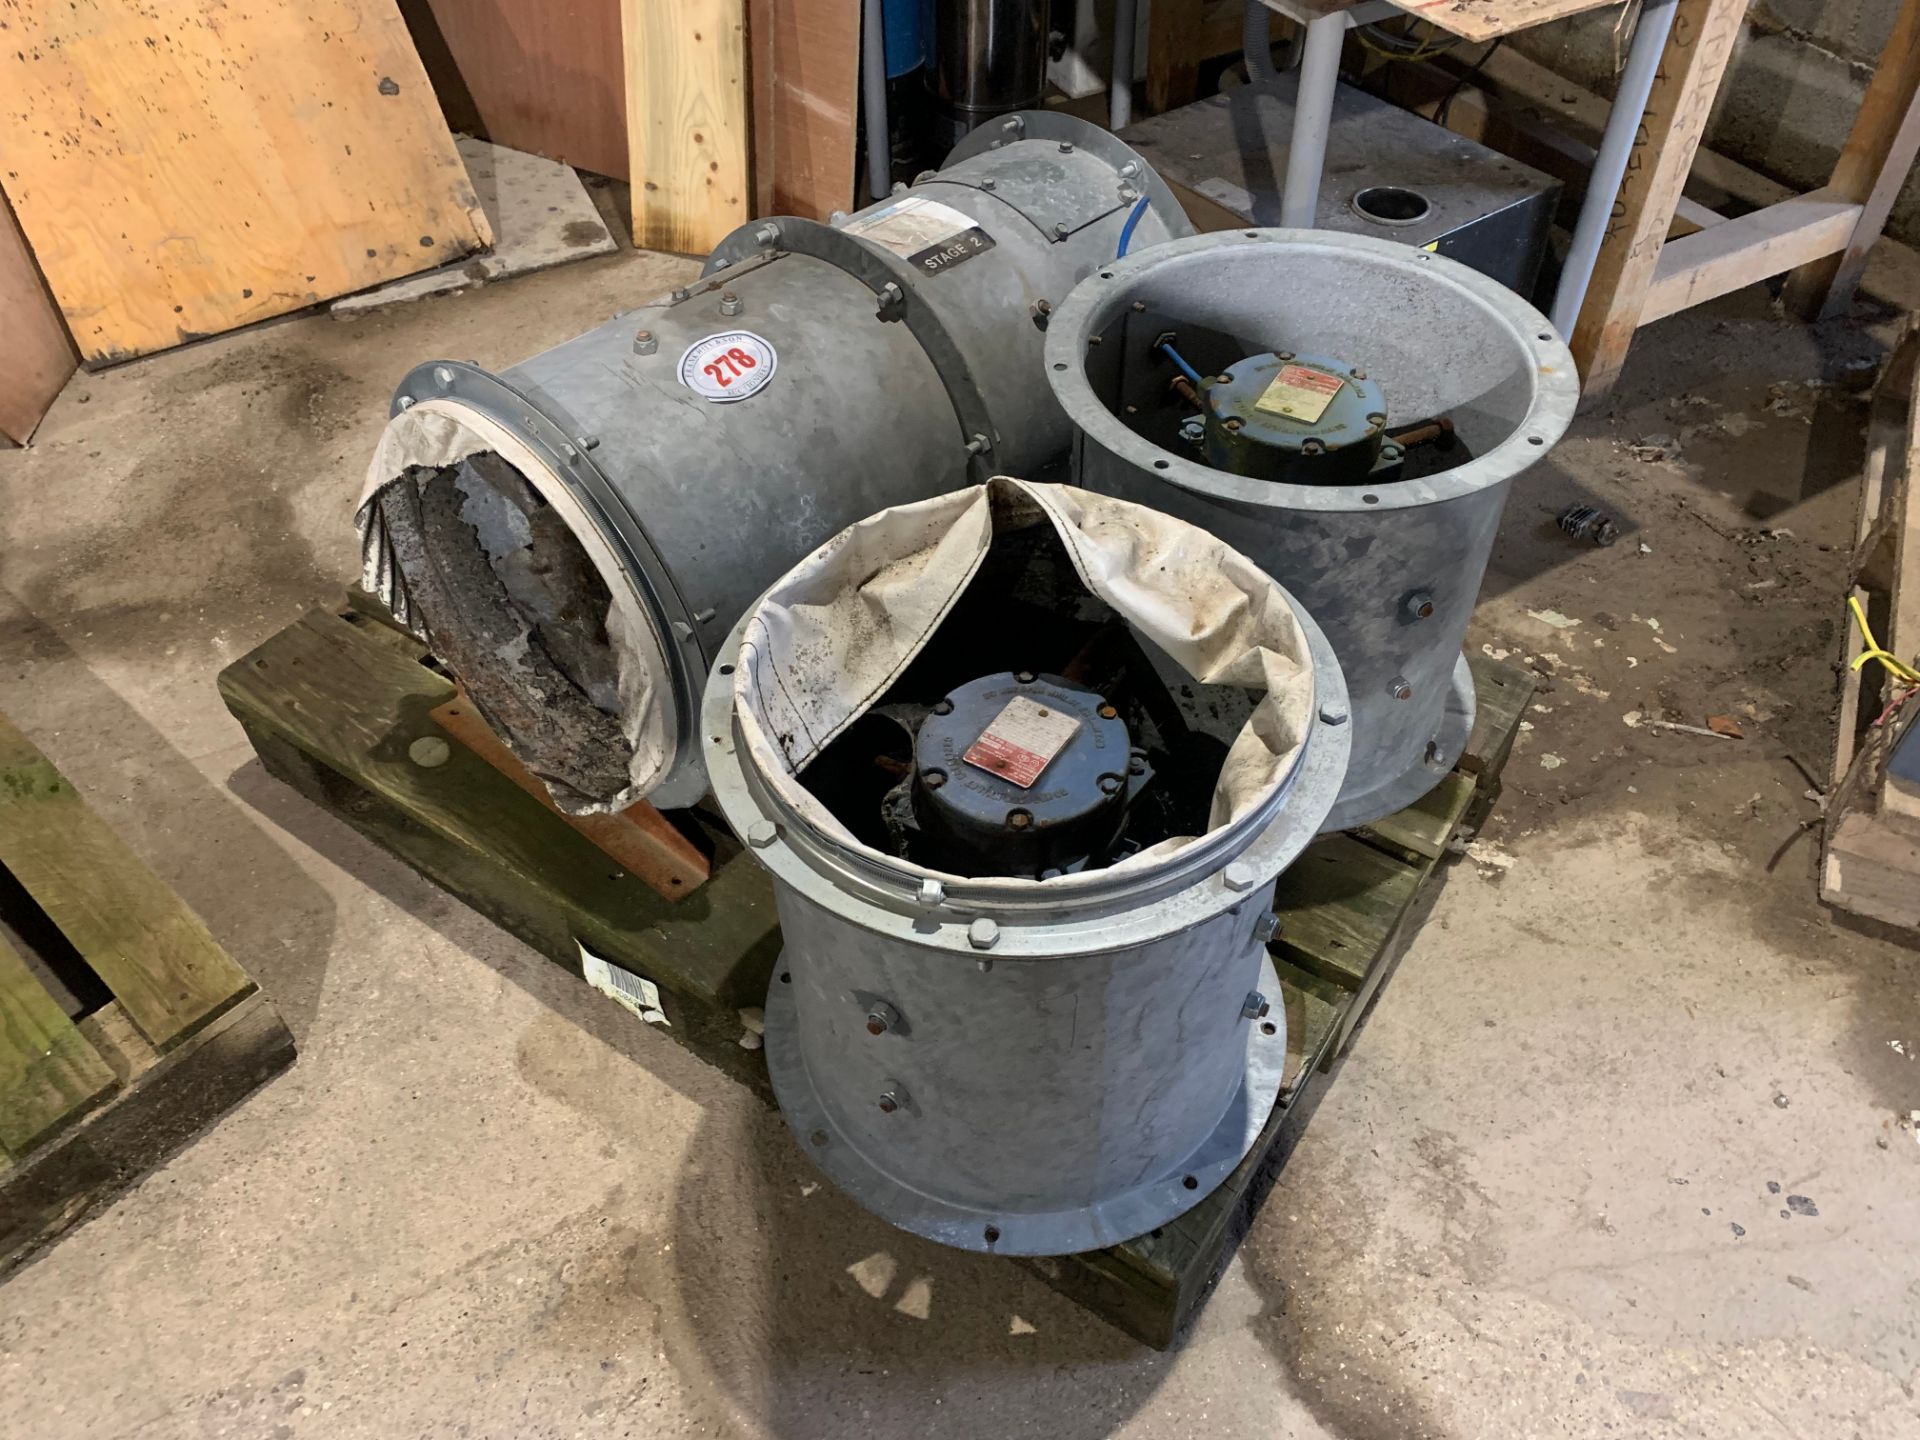 4 extractor fan units with motors